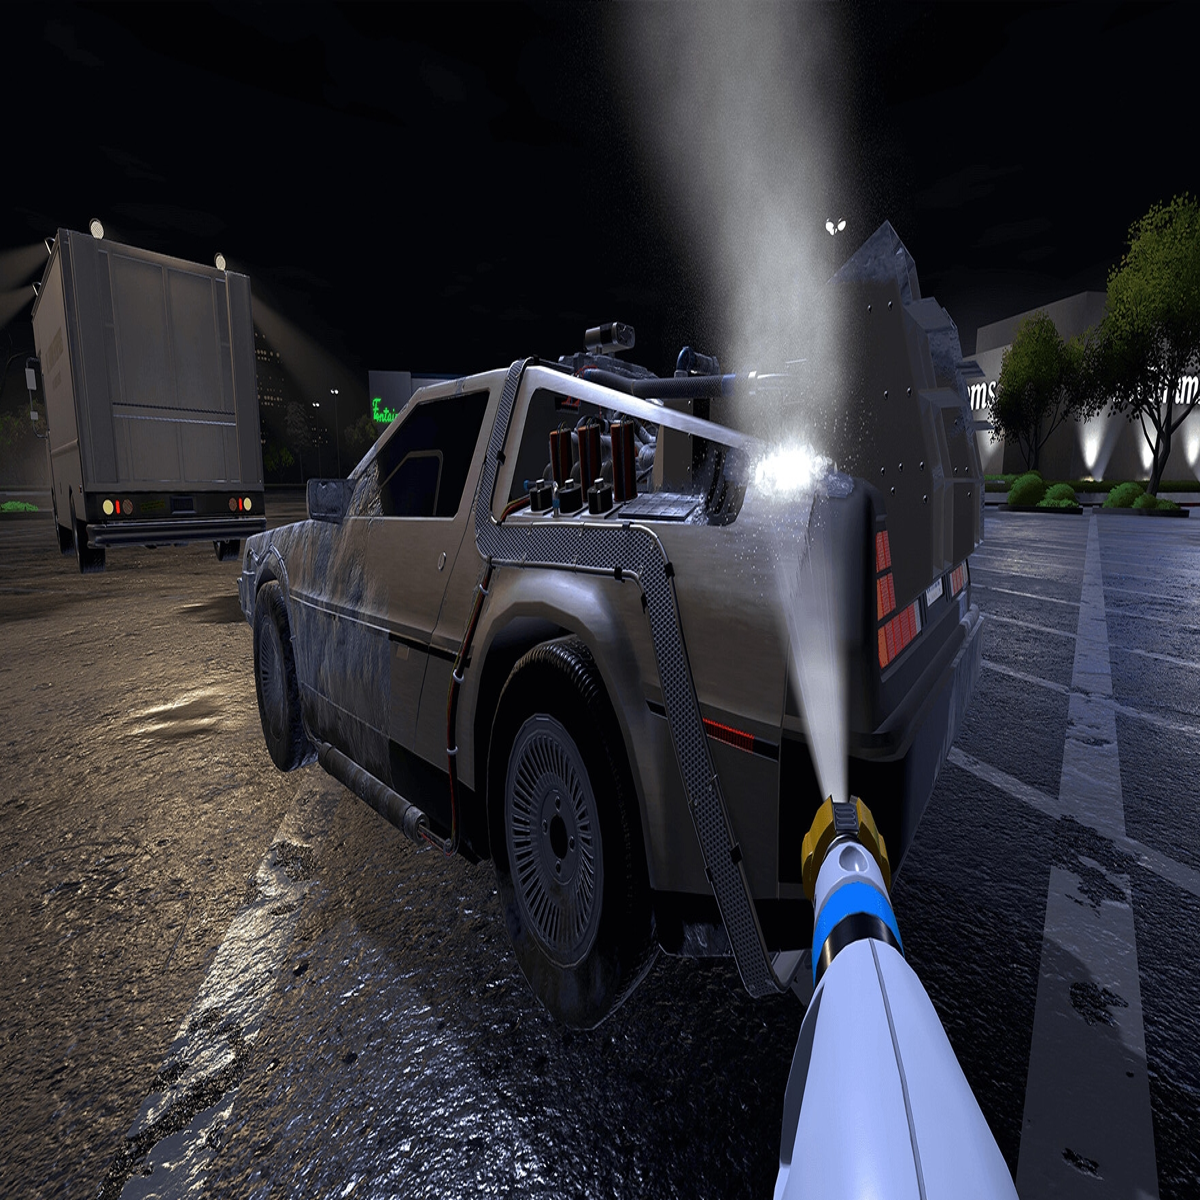 PowerWash Simulator adds paid Back to the Future DLC - The Tech Game